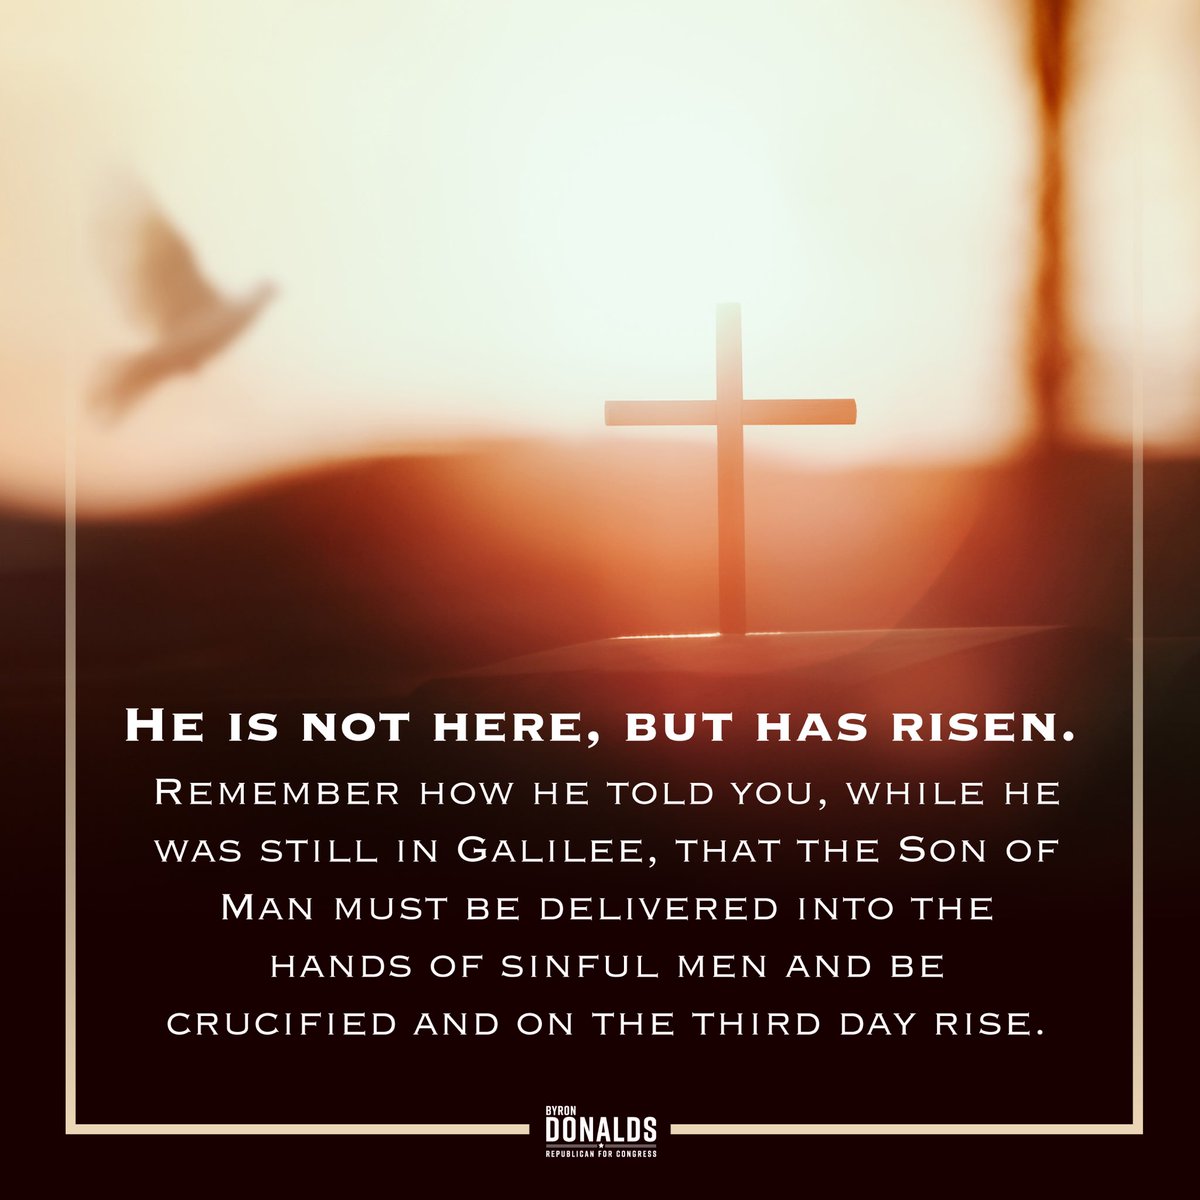 He is risen! Wishing you and your family a wonderful Easter.